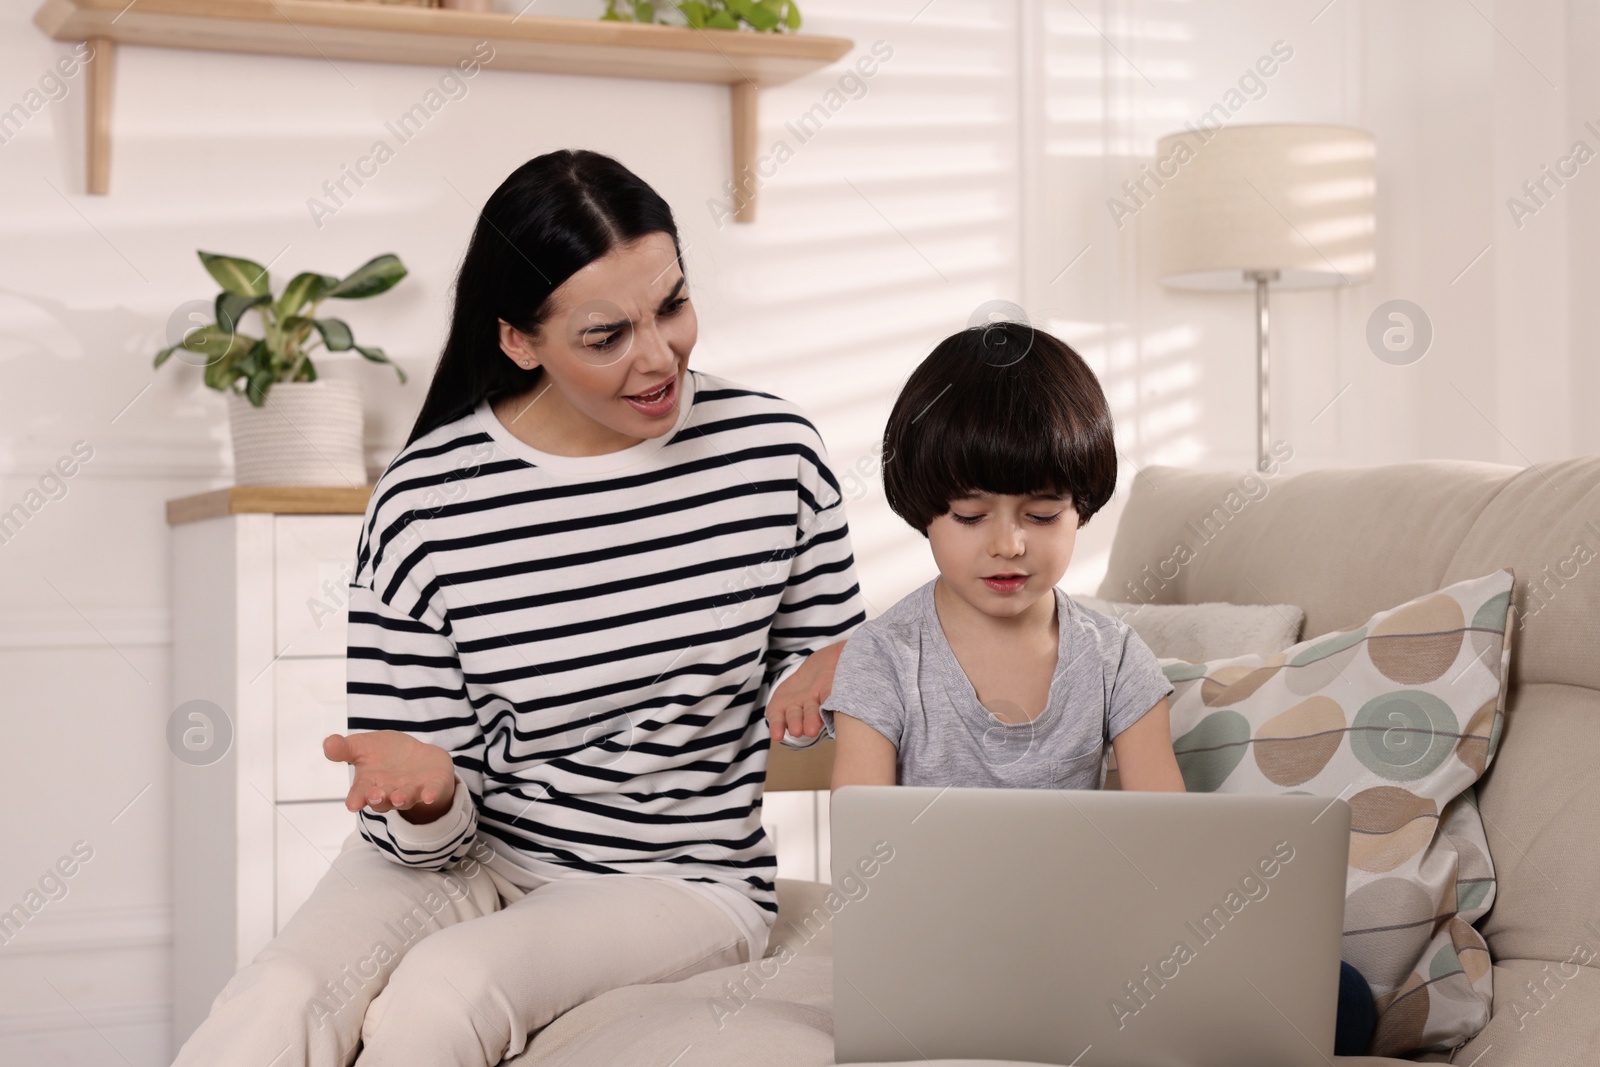 Photo of Internet addiction. Woman scolding her son while he using laptop in living room